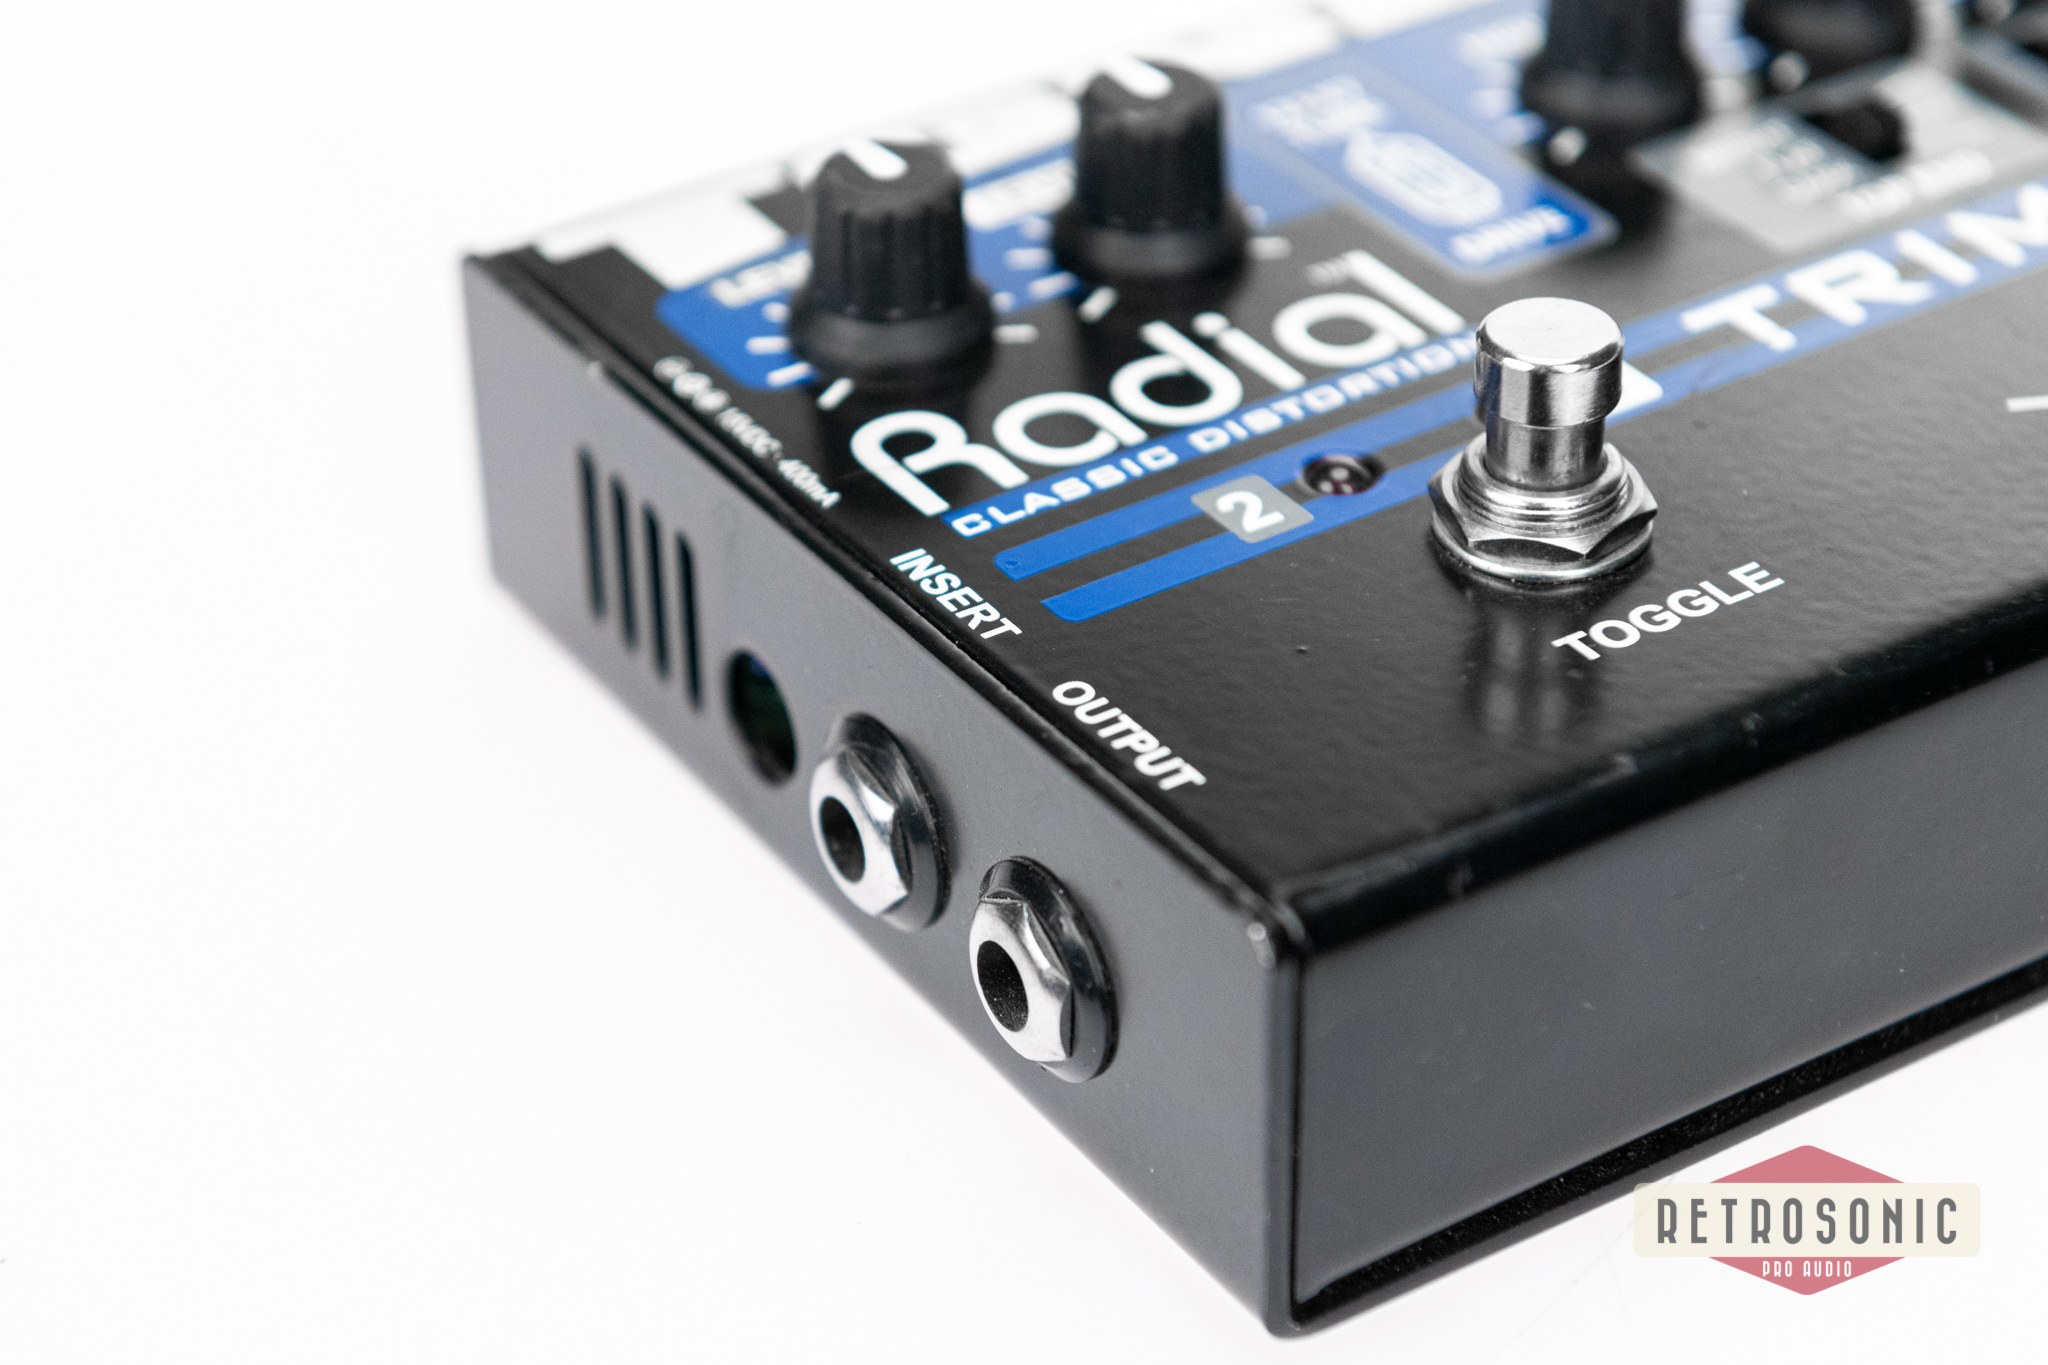 Radial Tonebone Trimode Distortion and EQ Pedal